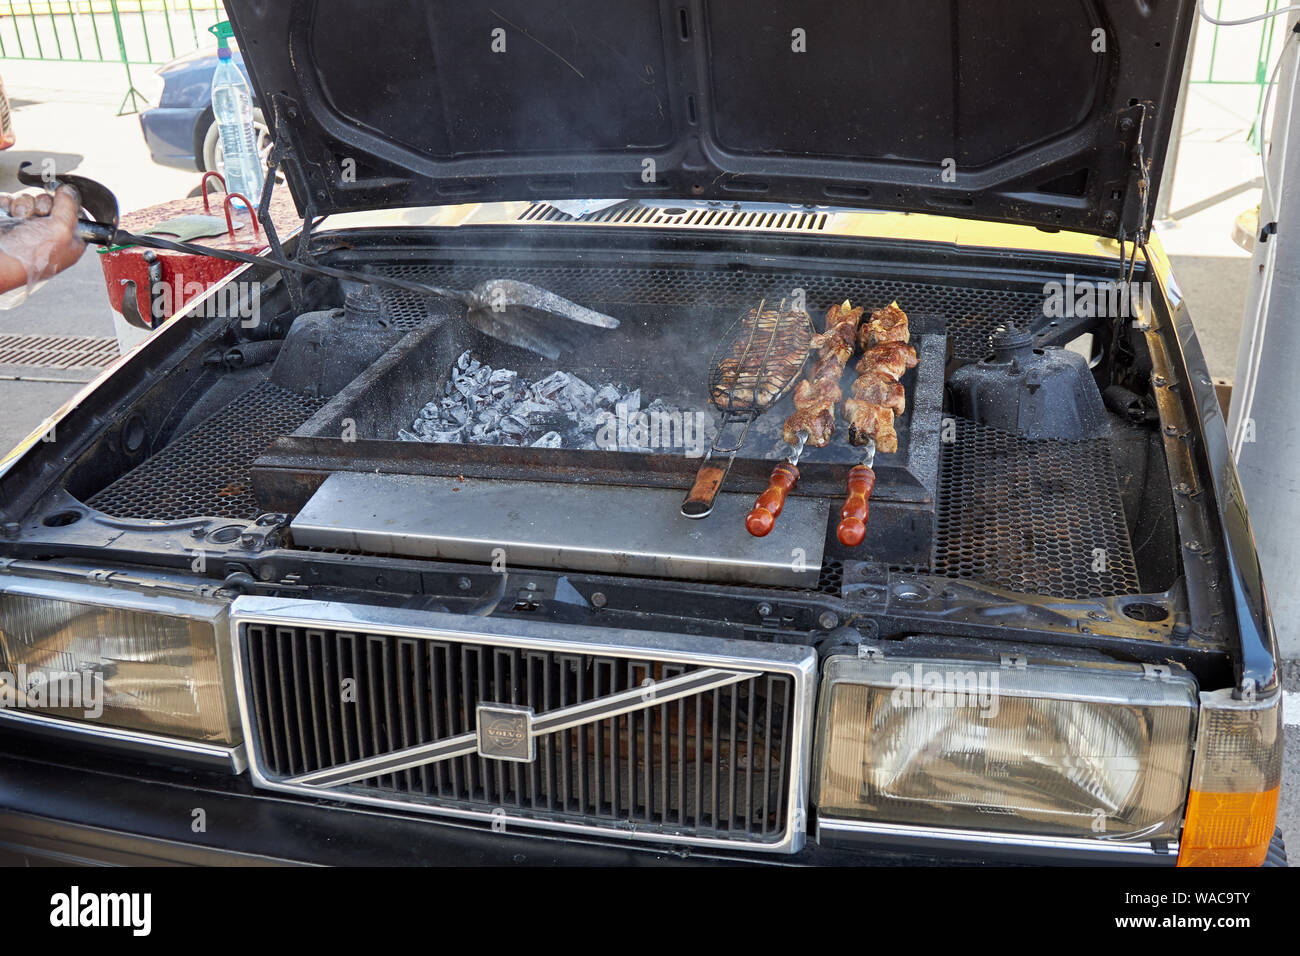 ROSTOV-ON-DON, RUSSIA, JUNE 16, 2019: Unique grill made under the hood of  the old Volvo car Stock Photo - Alamy